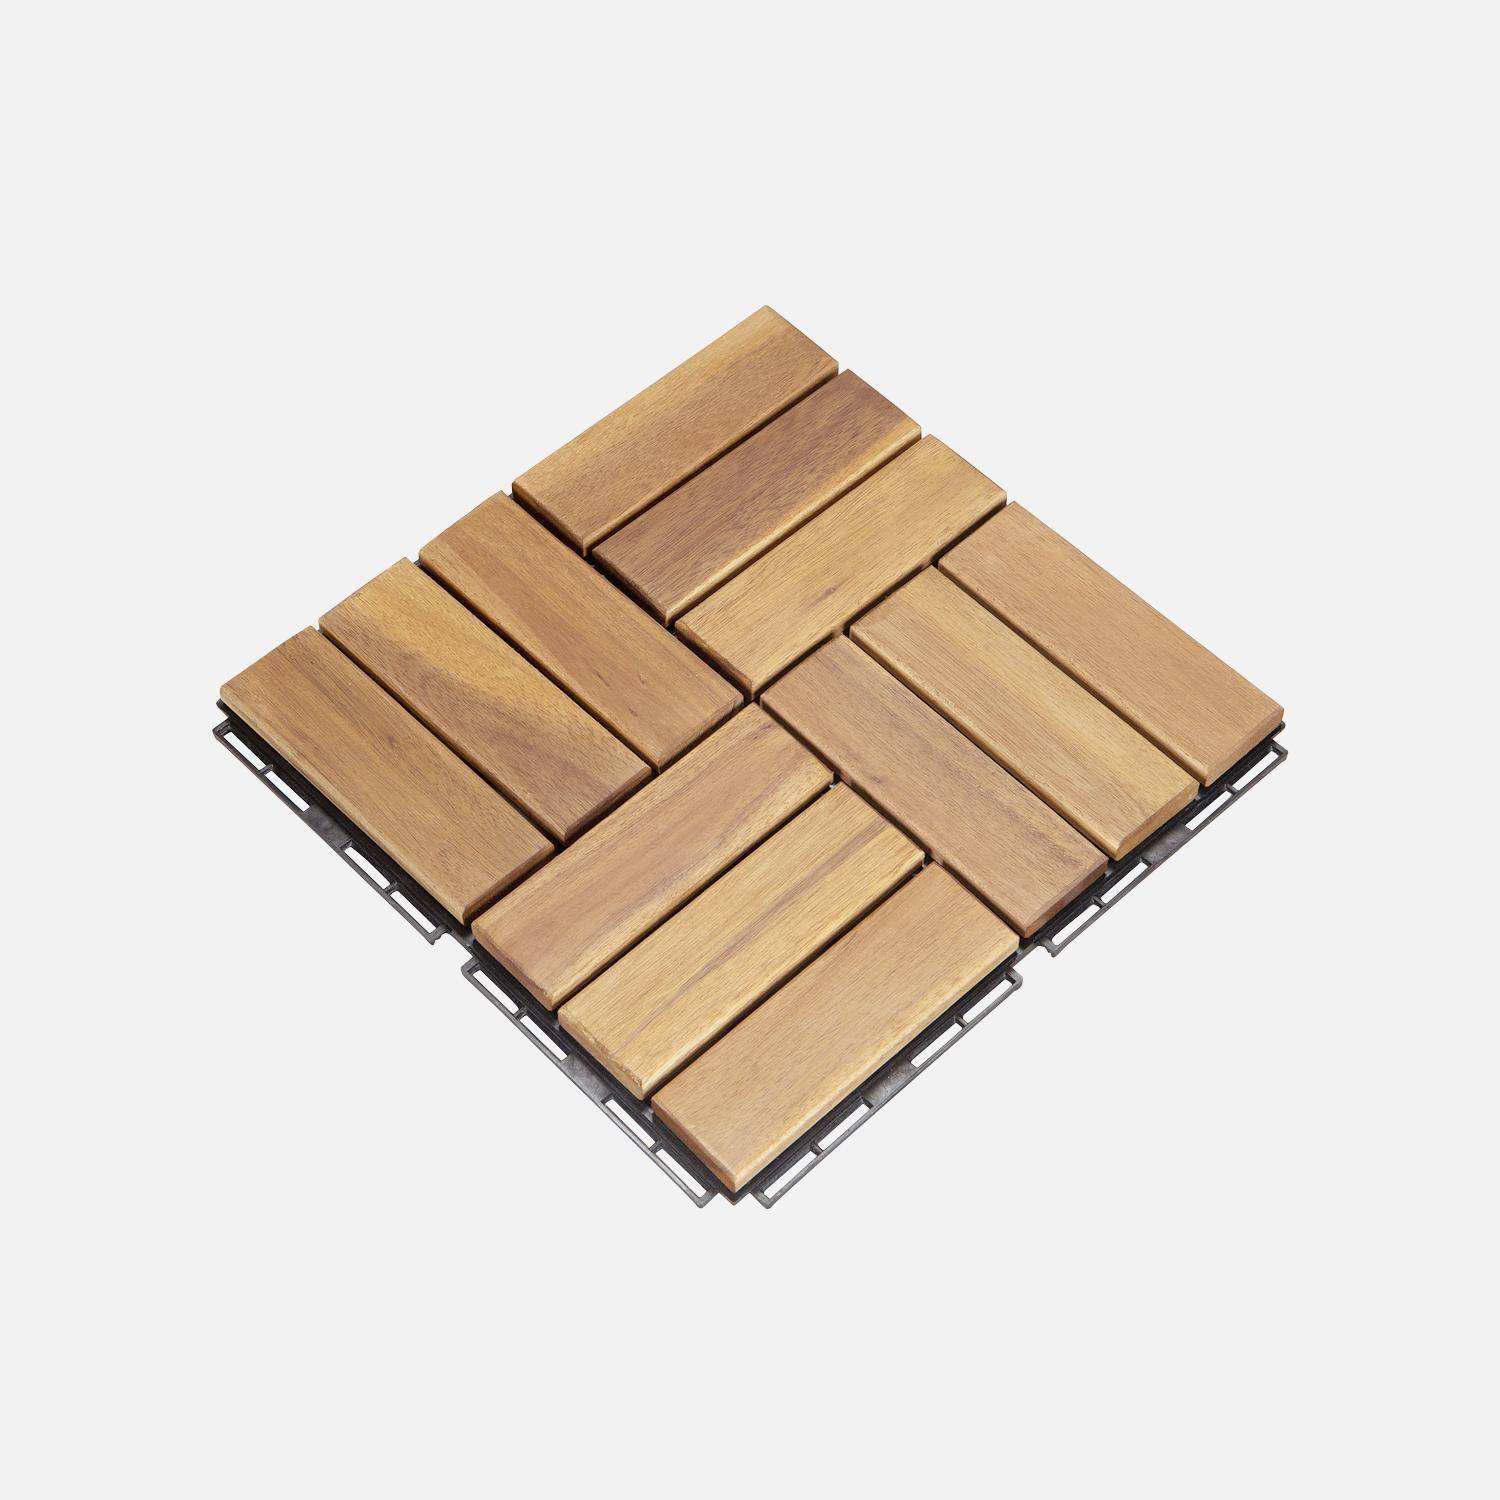 Pack of 10 acacia wood decking tiles 30x30cm, square pattern, clip-on Photo2